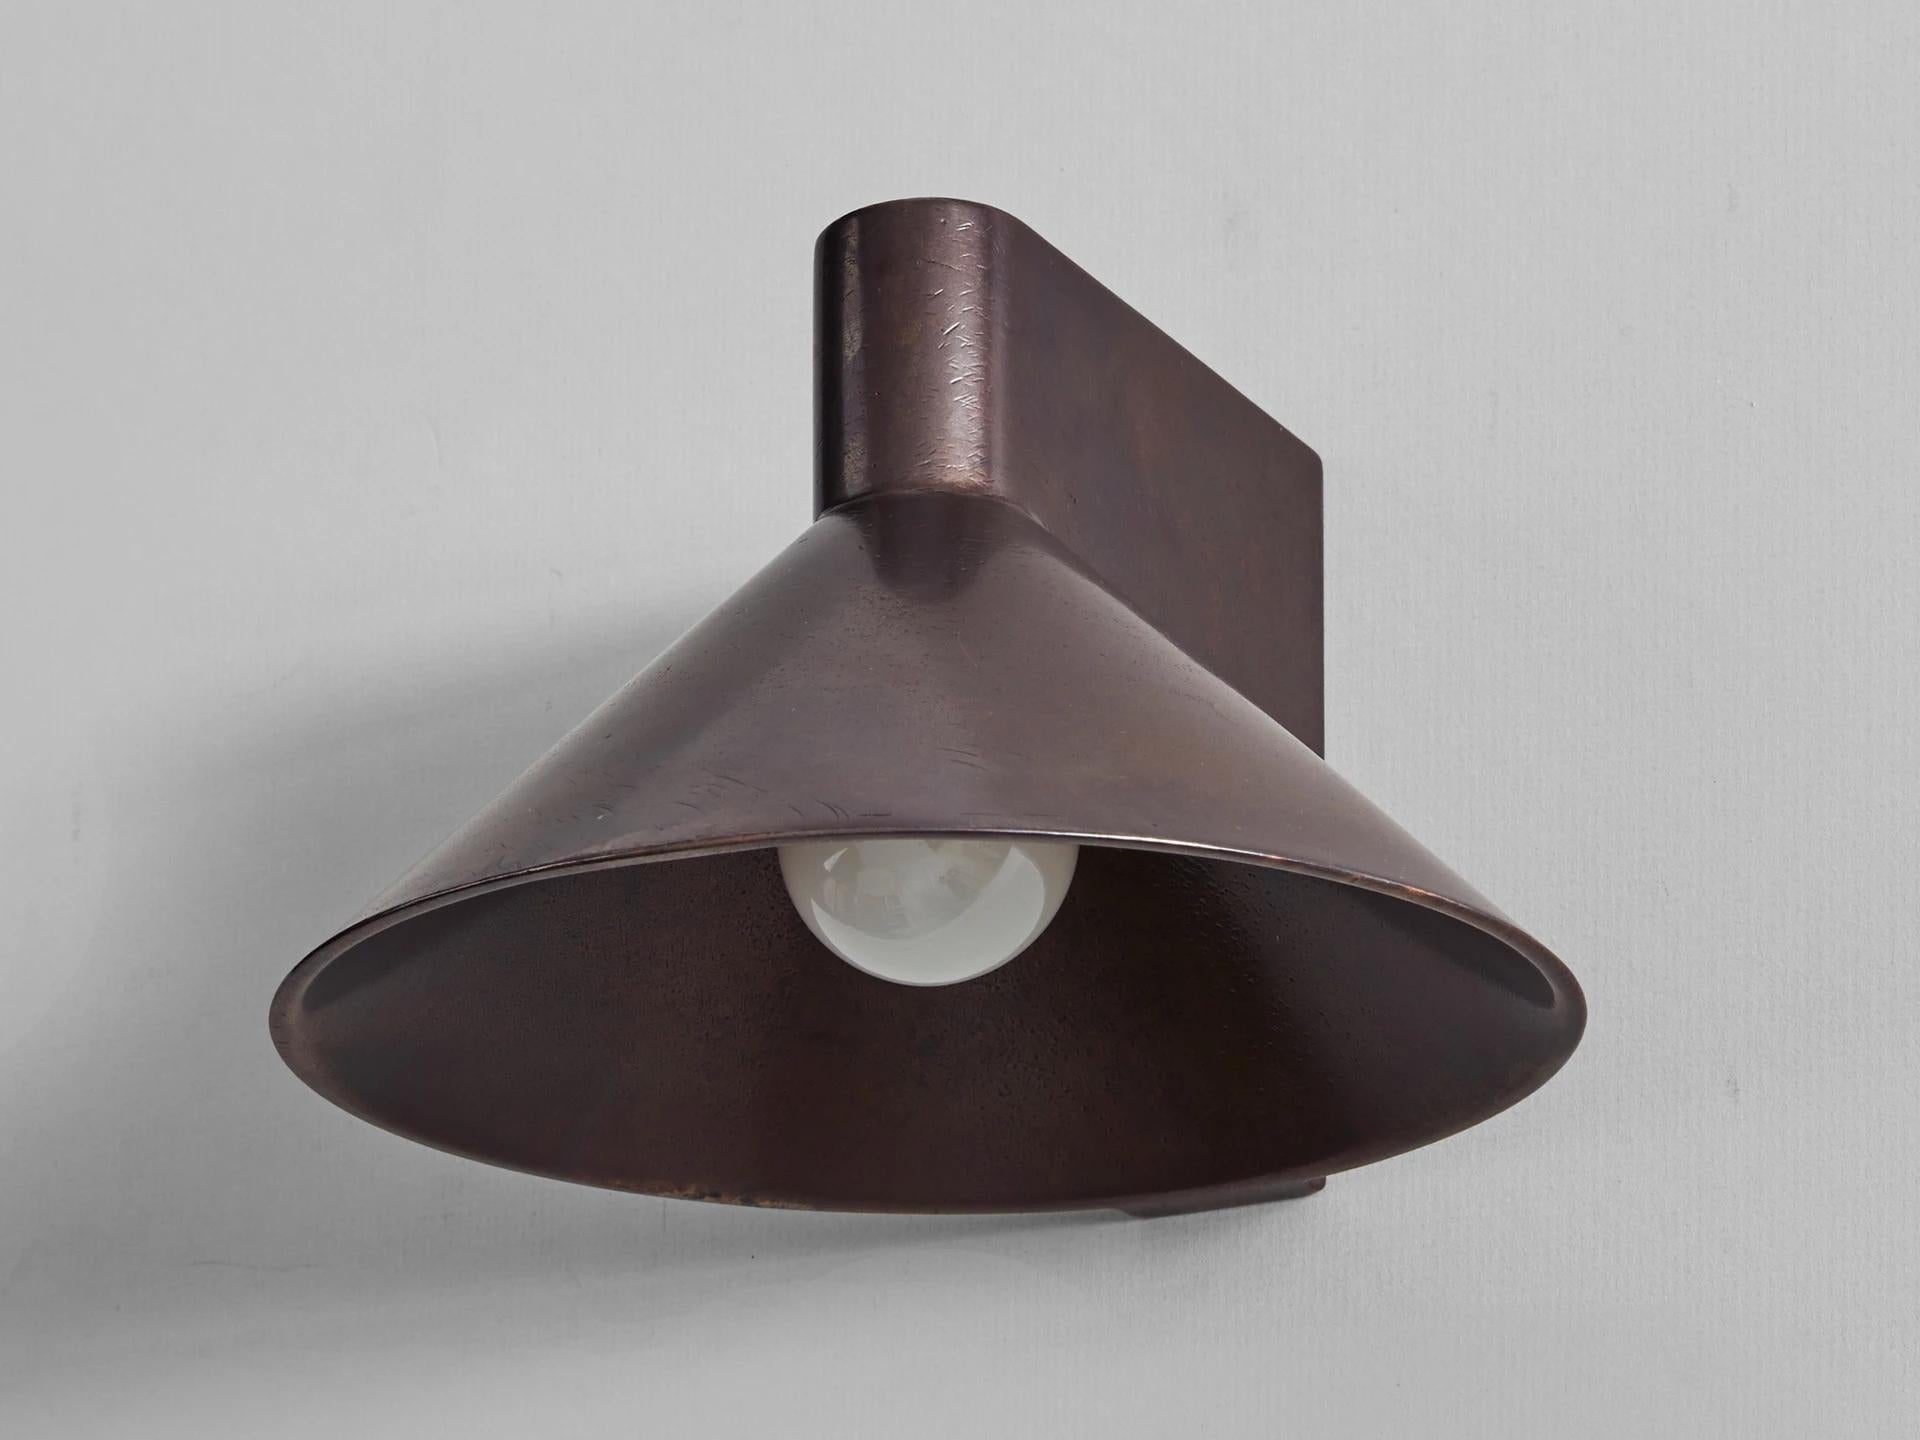 Conical Up, Sculpted Blackened Bronze Wall Light by Henry Wilson
Lost wax cast in solid bronze, the conical wall light is our most complex production casting to date. Each piece is hand finished and can be mounted to any surface as an up or down